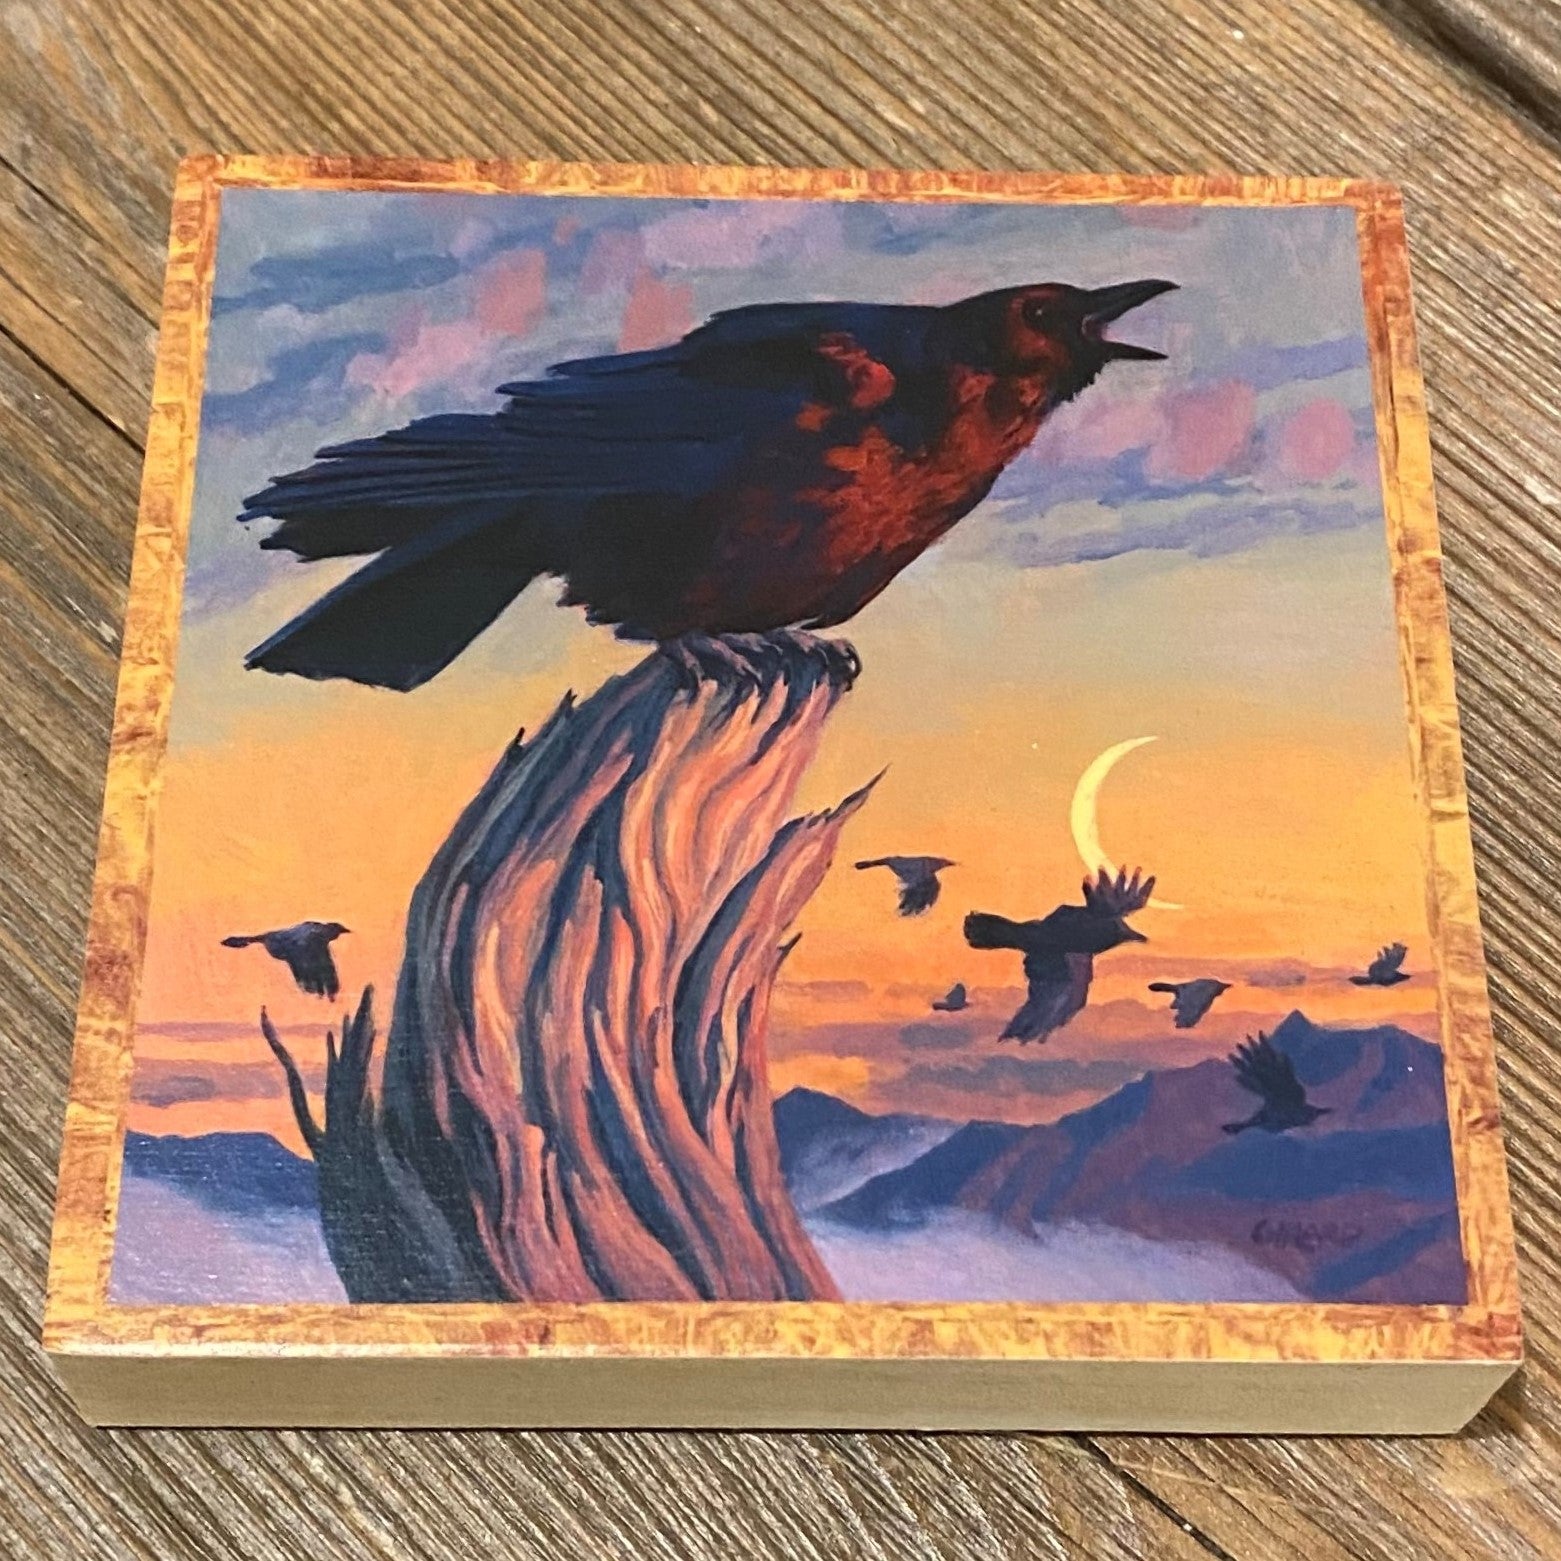 The Call of Home Raven - Wood Block by artist Francois Girard